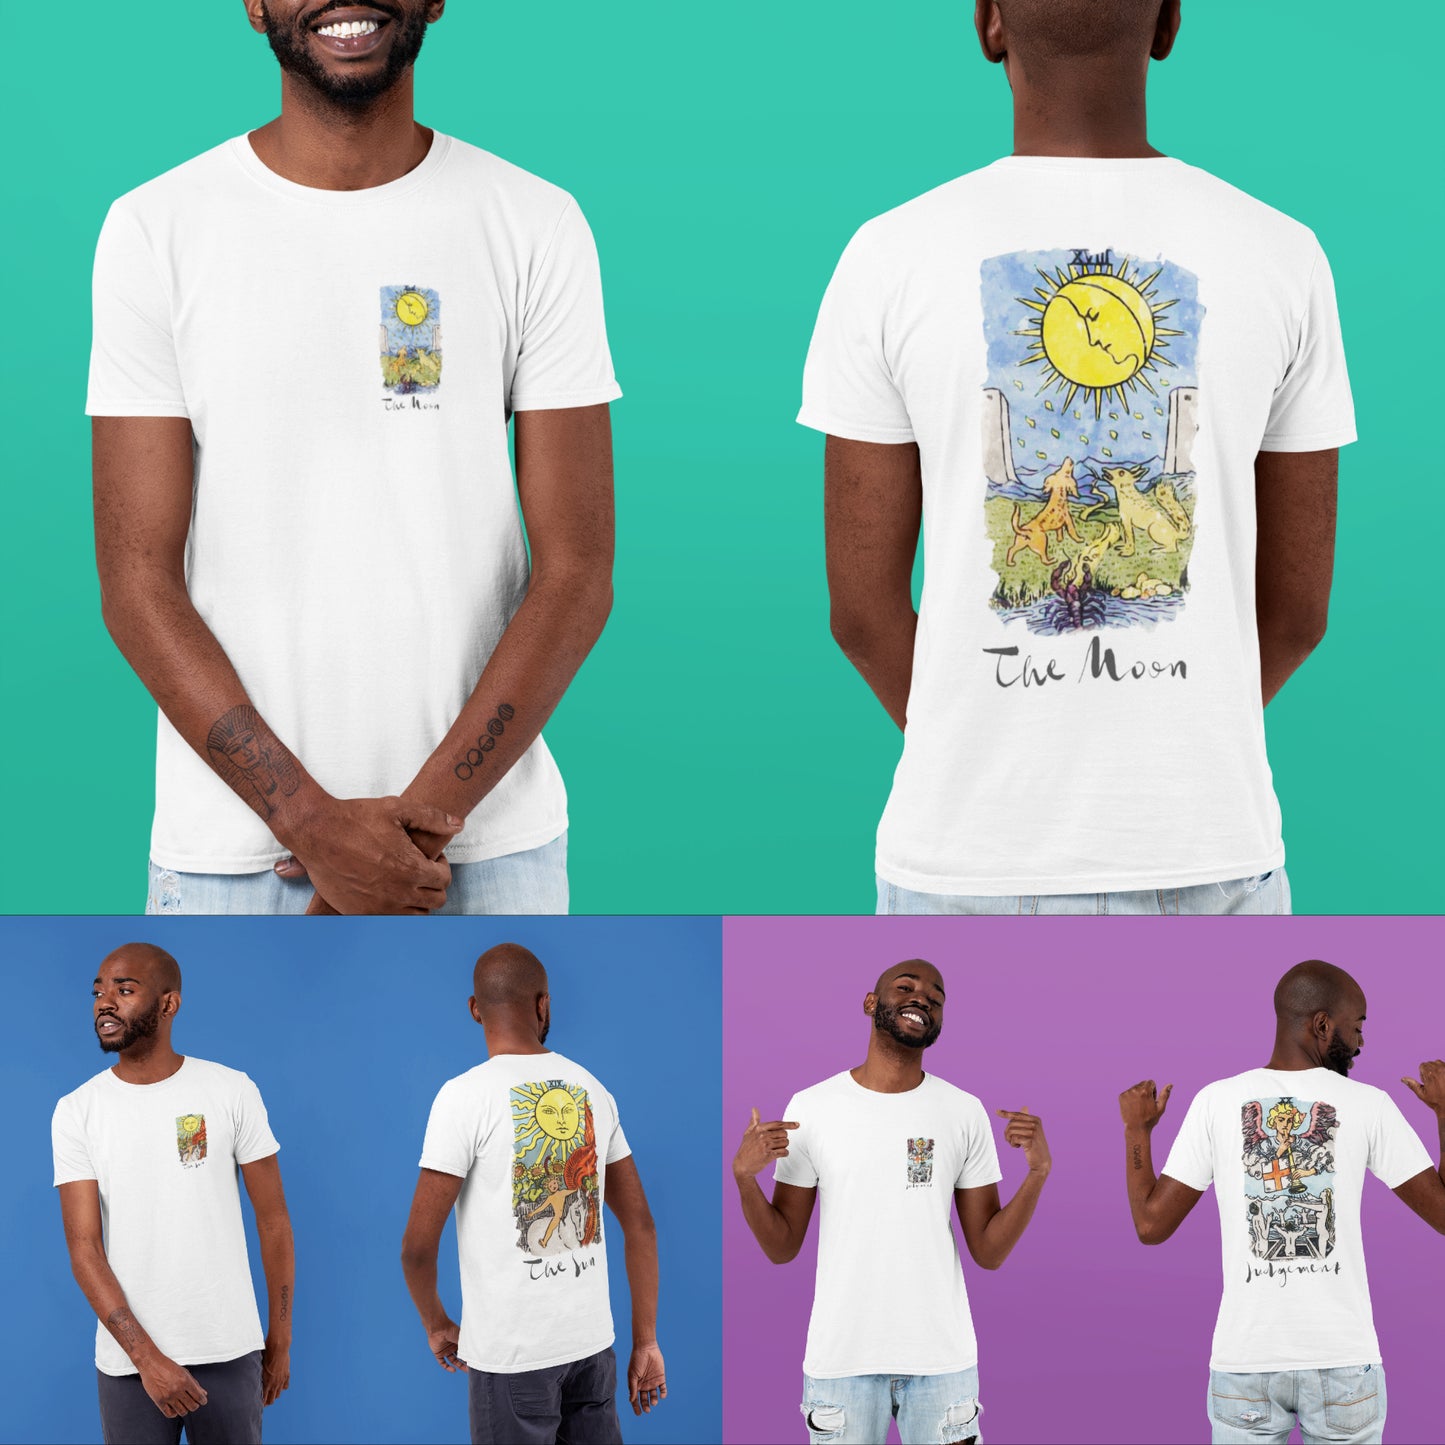 Tarot Card T-Shirt | White Unisex Tees With Front And Back Prints Of Major Arcana Cards | Witchy Shirts For Spiritual Men And Women | Apollo Tarot Shop